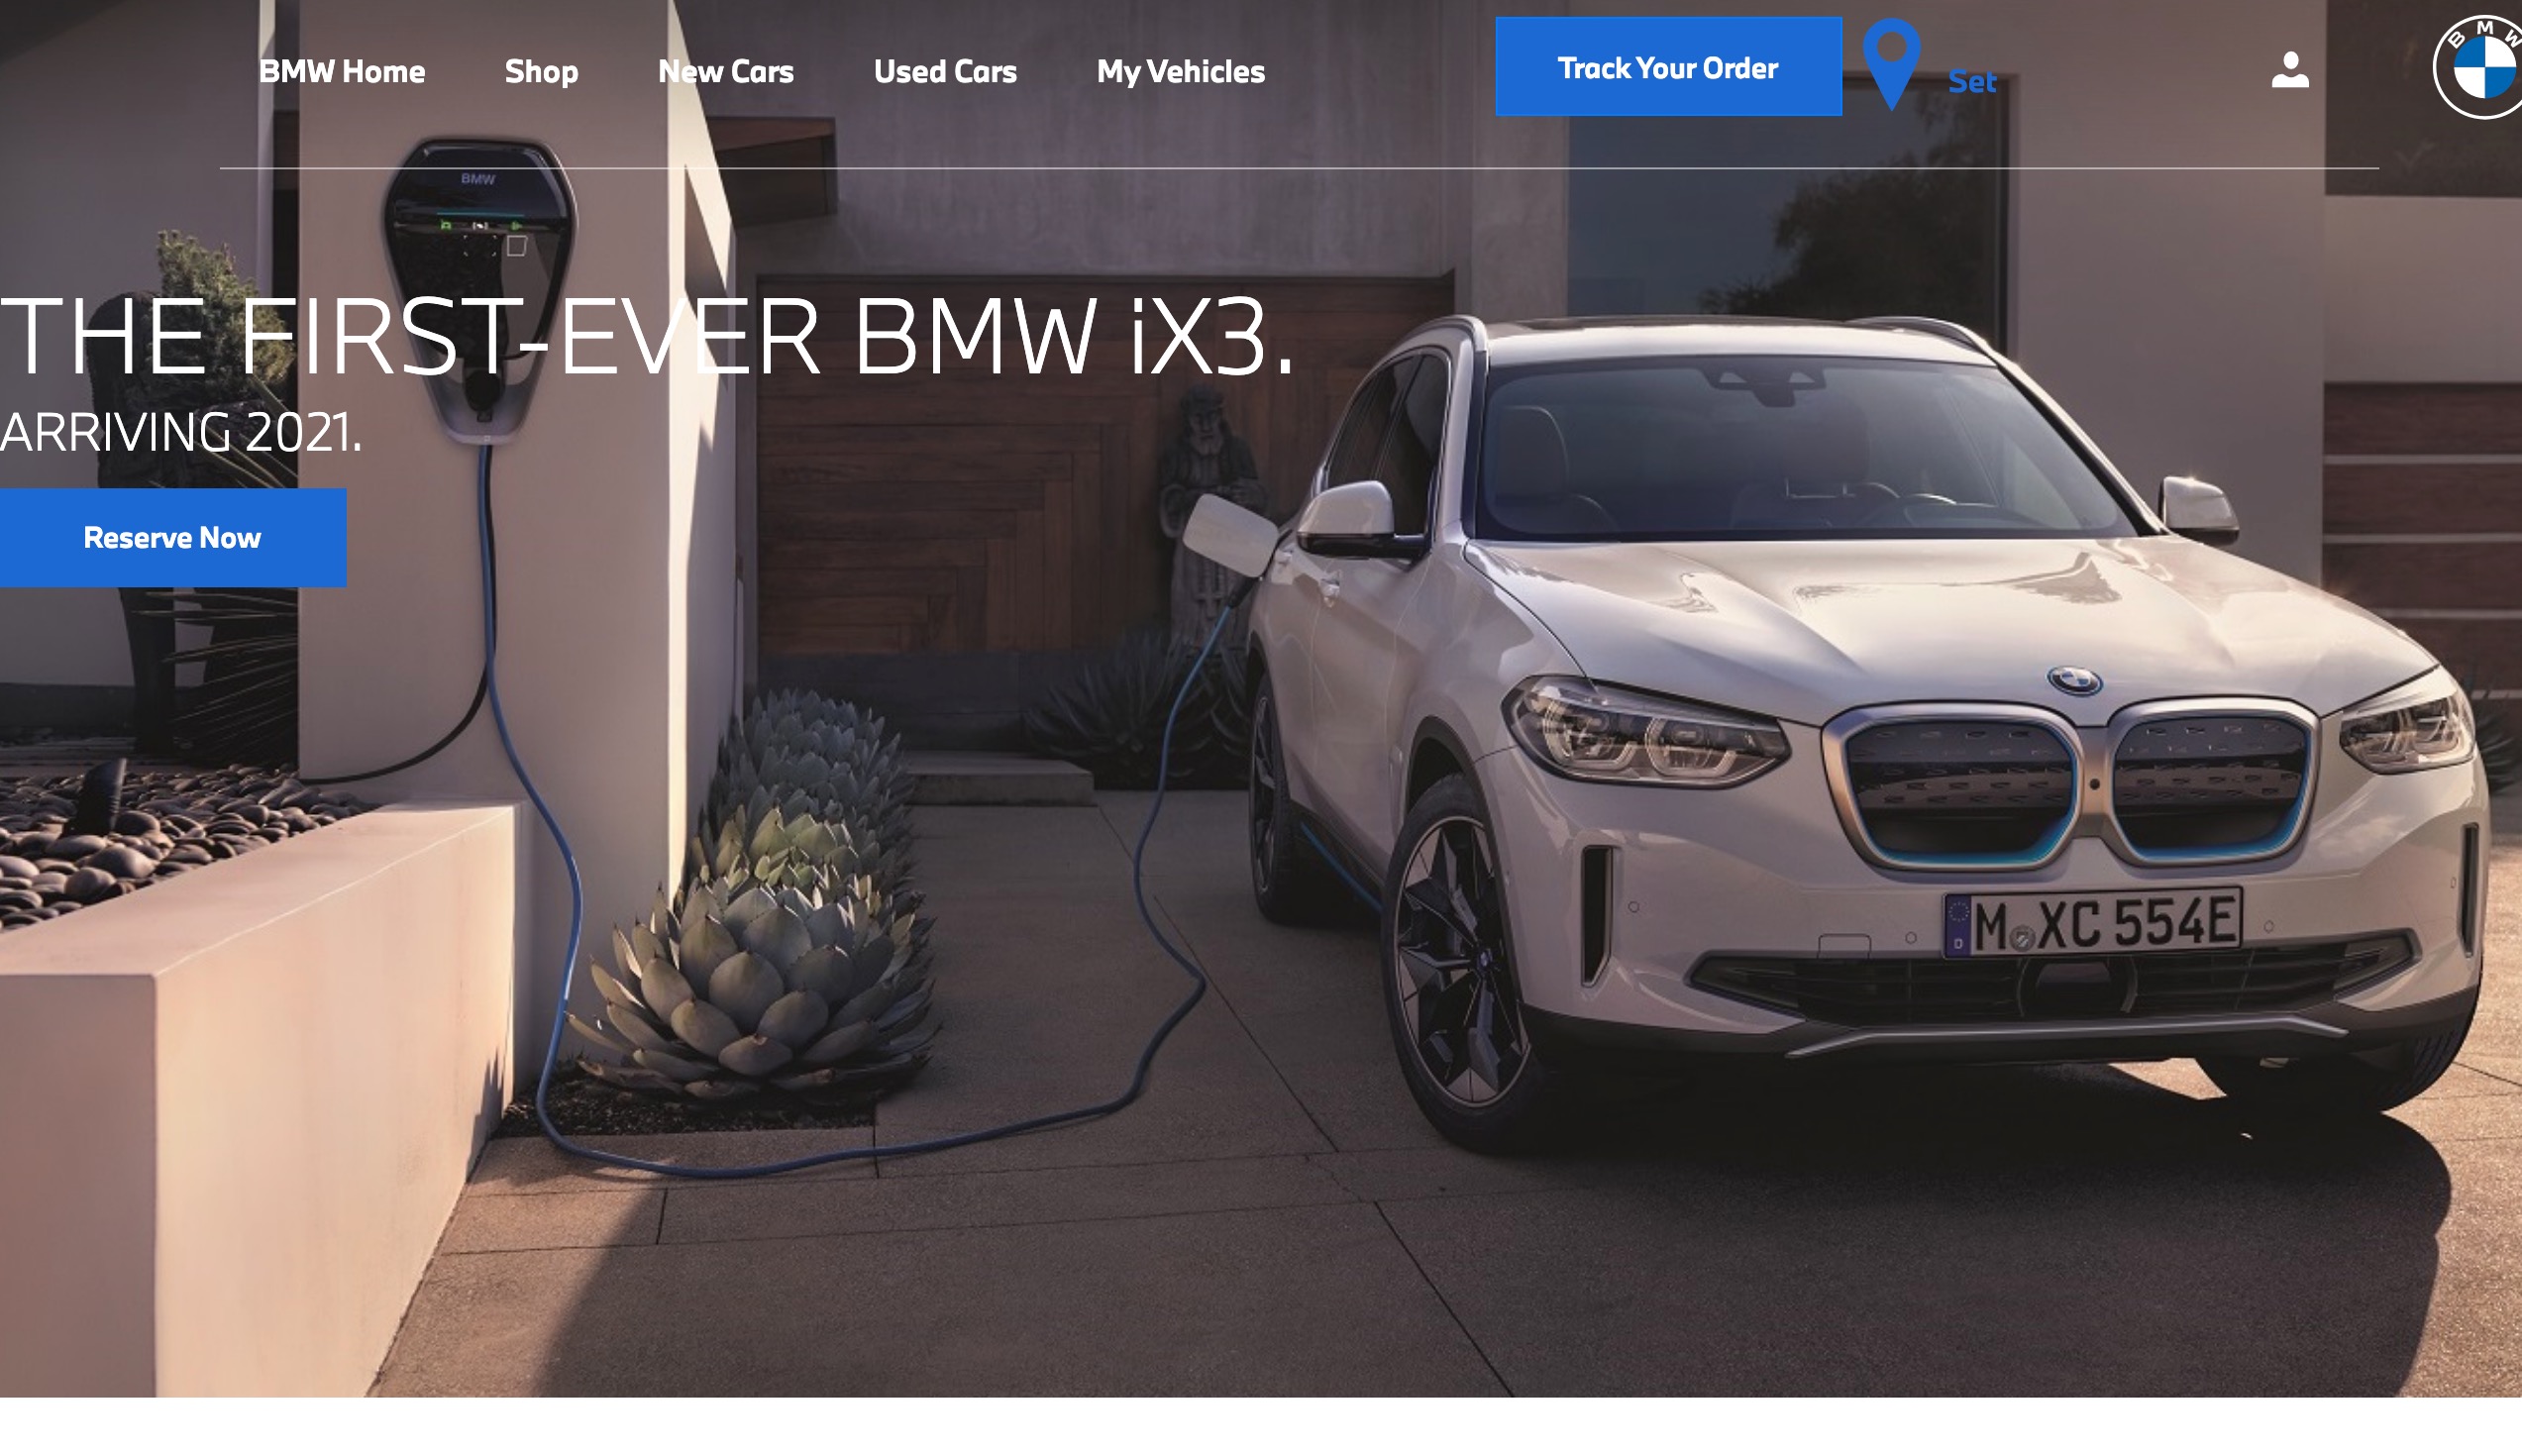 BMW iX3 electric SUV now available for pre-order in Australia